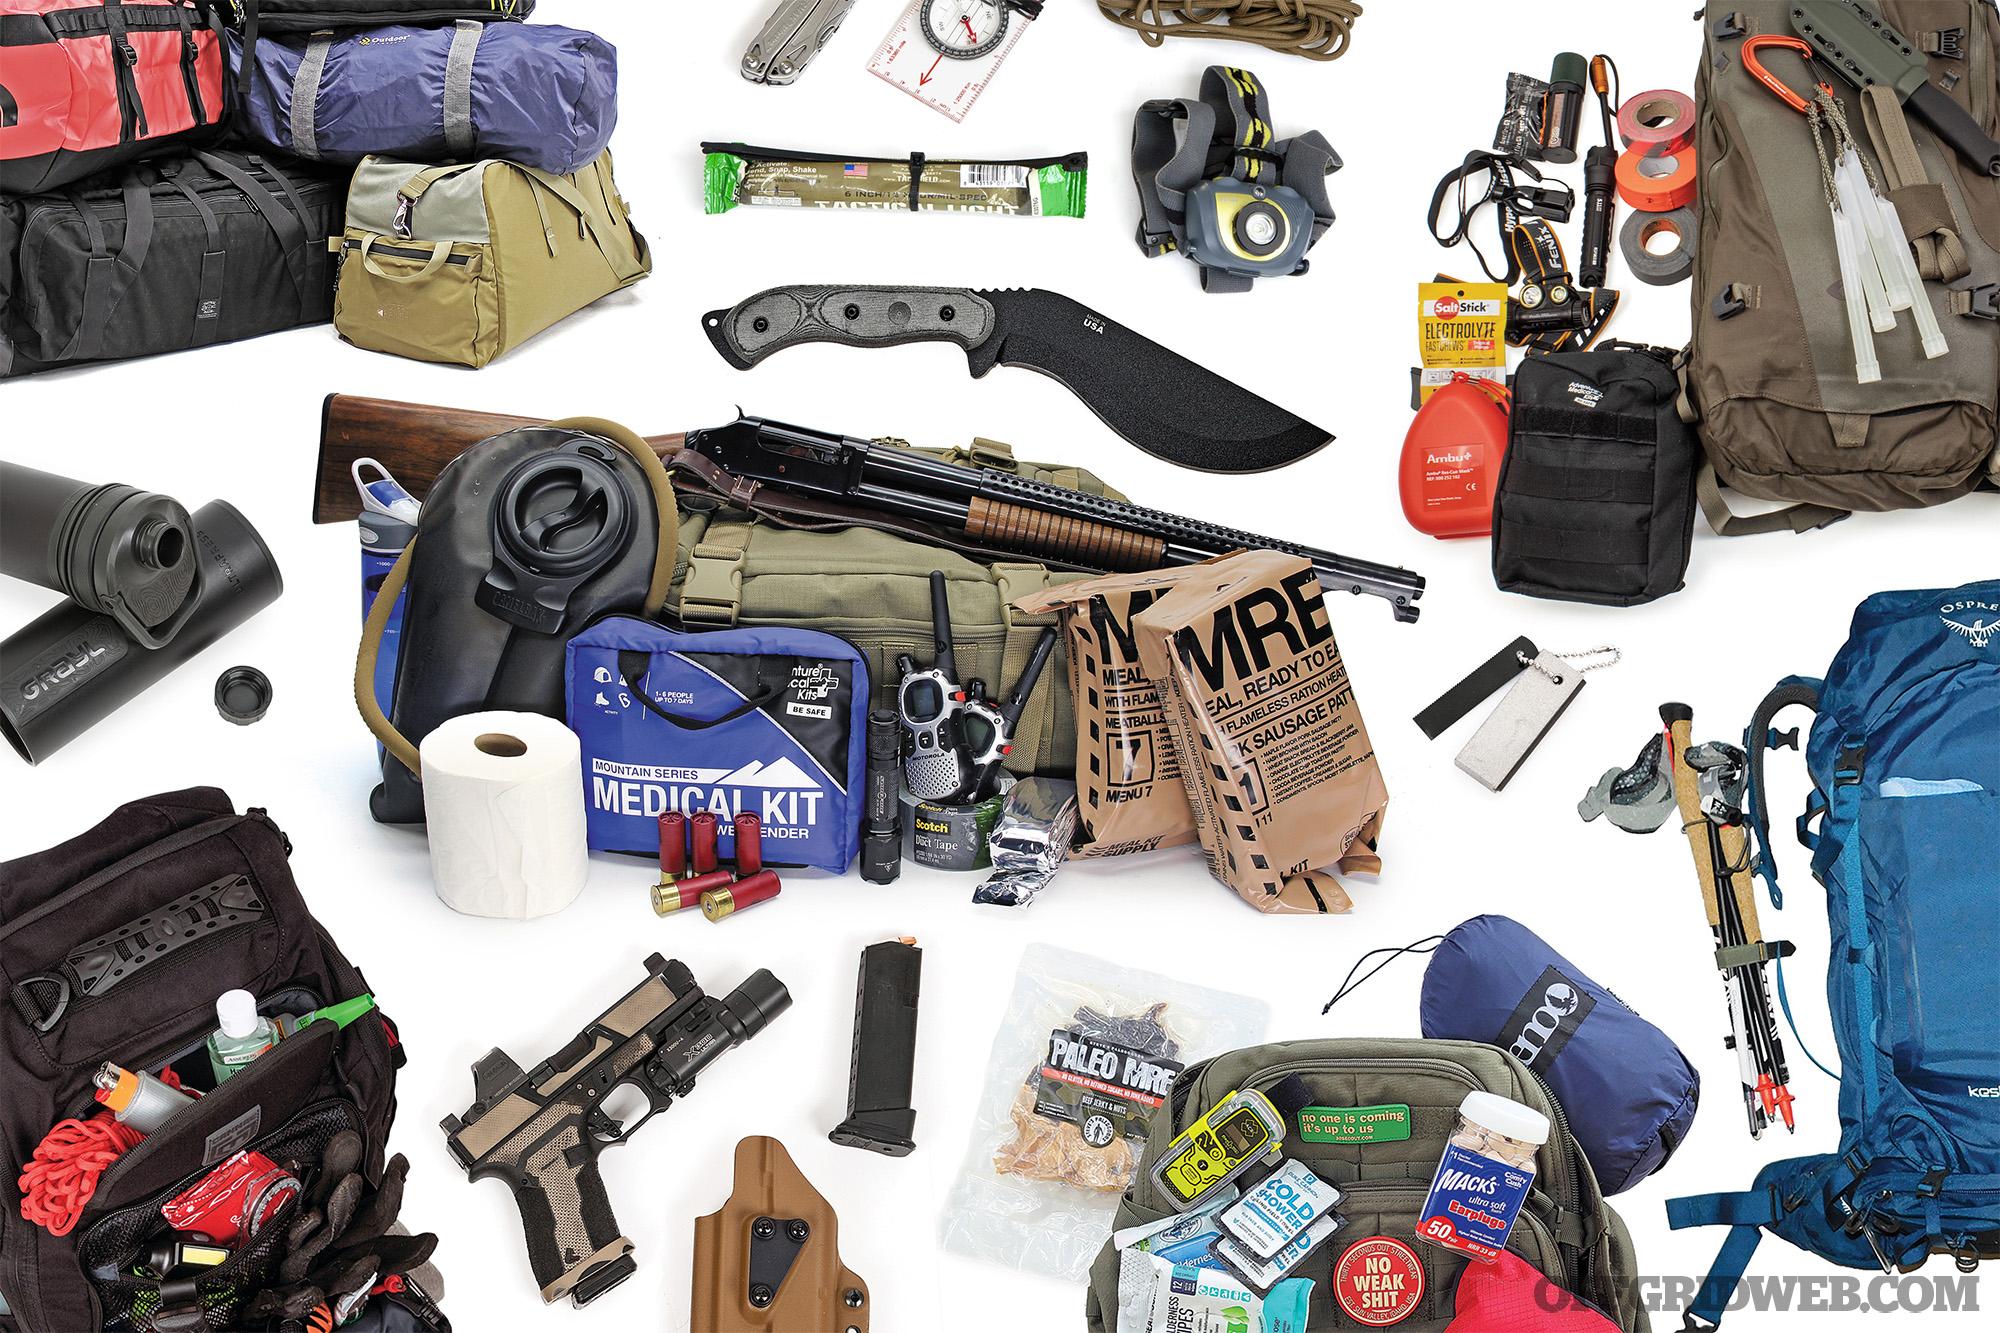 4 Real Life Bug Out Bags - Contents Revealed